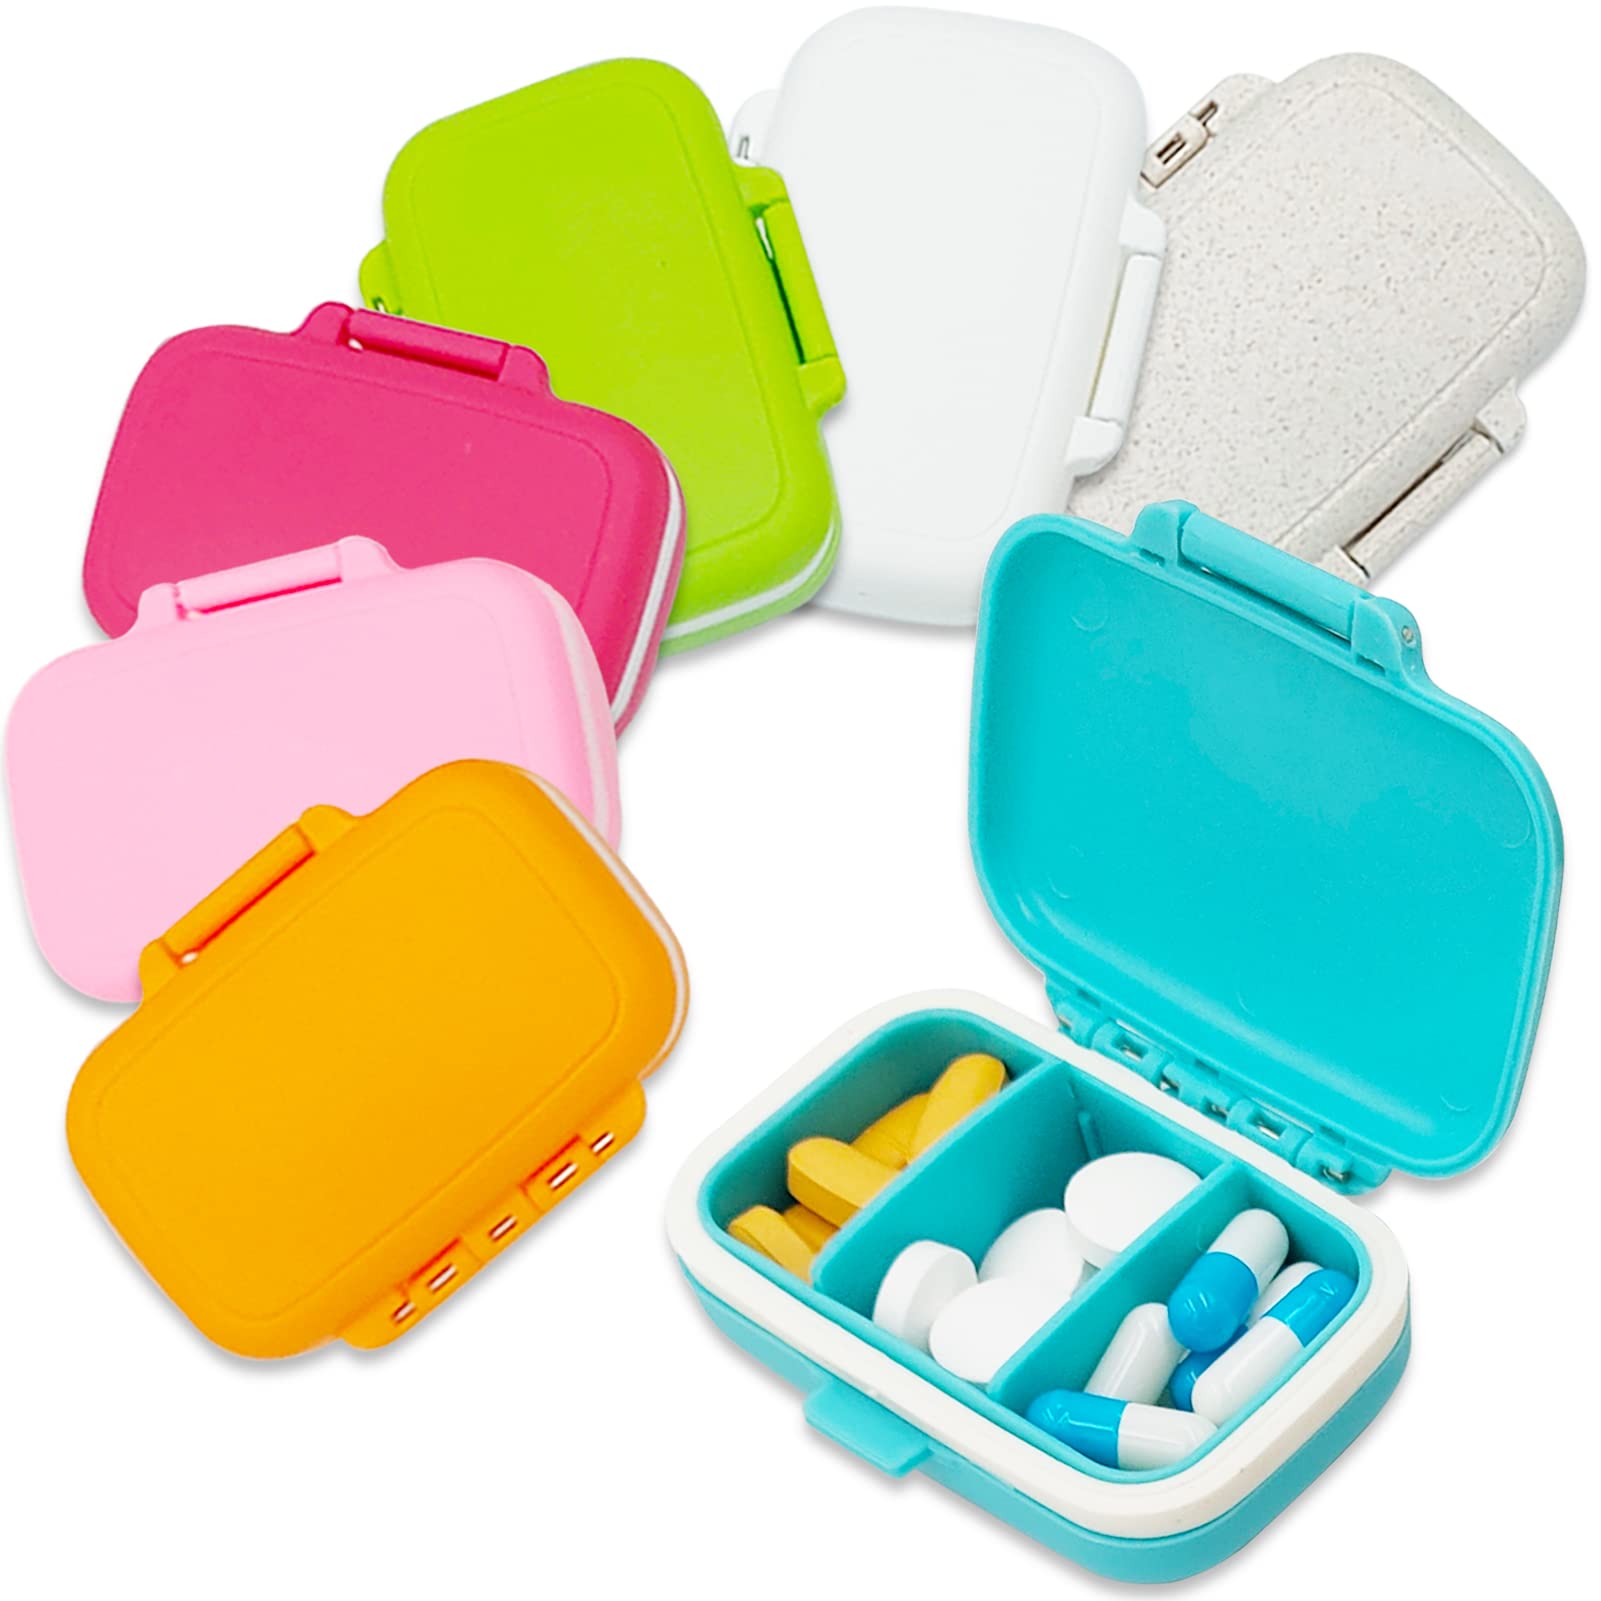 3 Pack 8 Compartments Travel Pill Box,Pill Organizer 7 Days Moisture Proof Small Pill Case for Pocket Purse Daily Portable Medicine Vitamin Holder